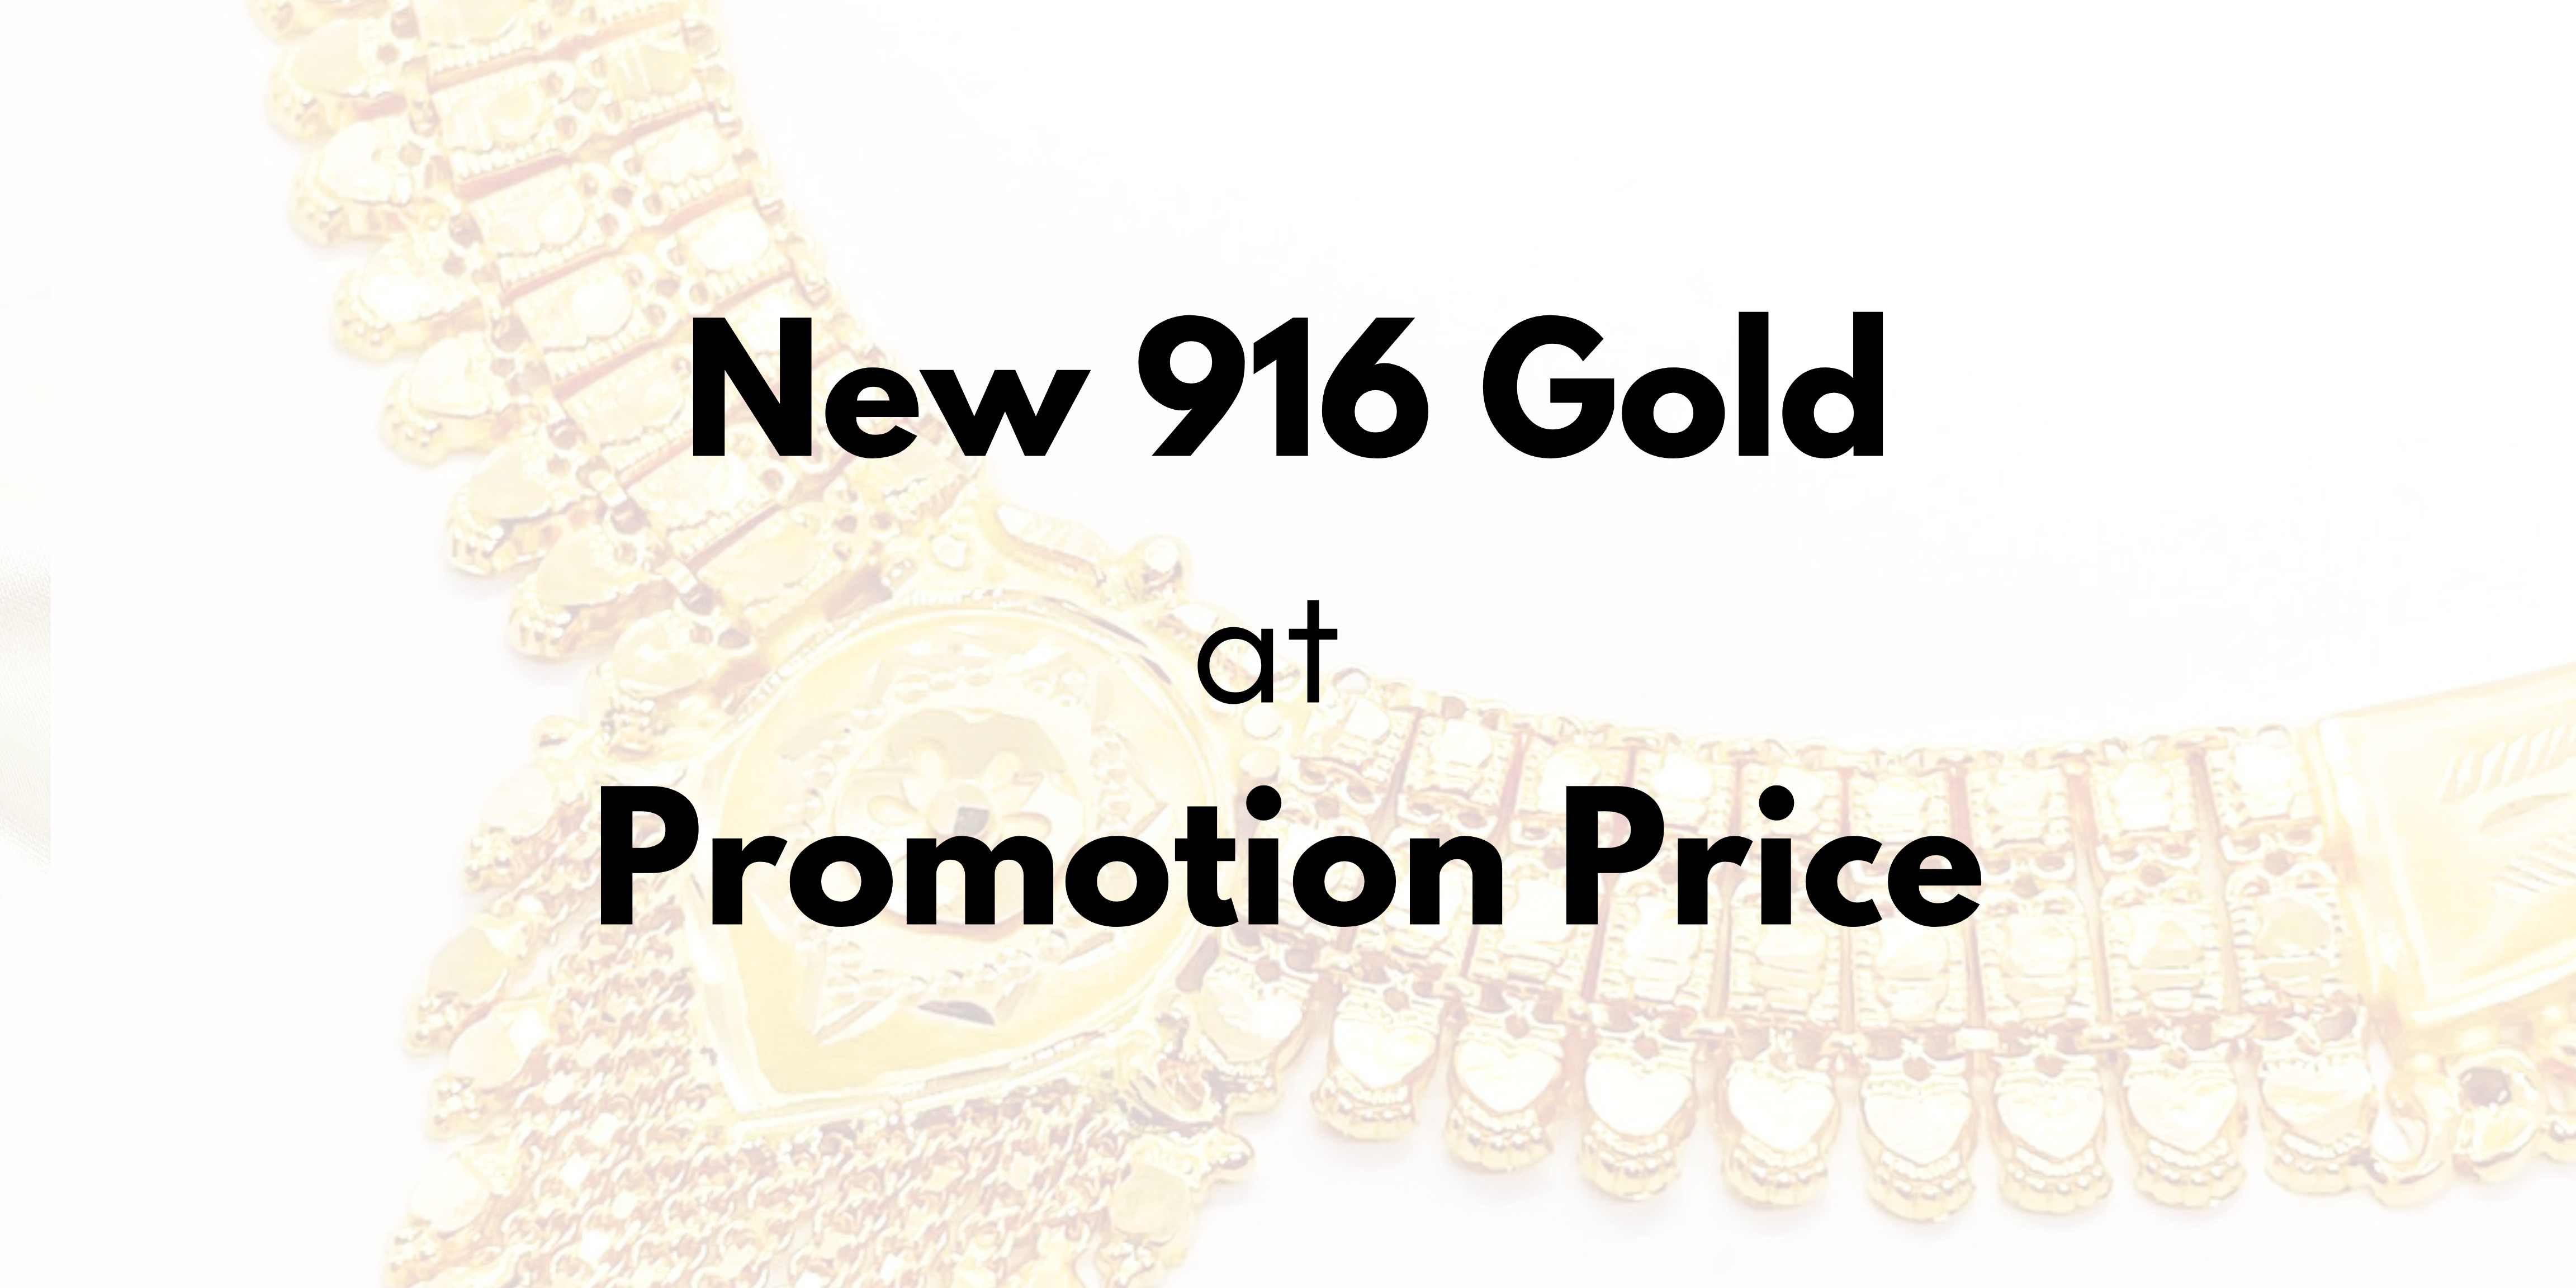 Latest Gold Prices in Malaysia on 916 and 999 Gold